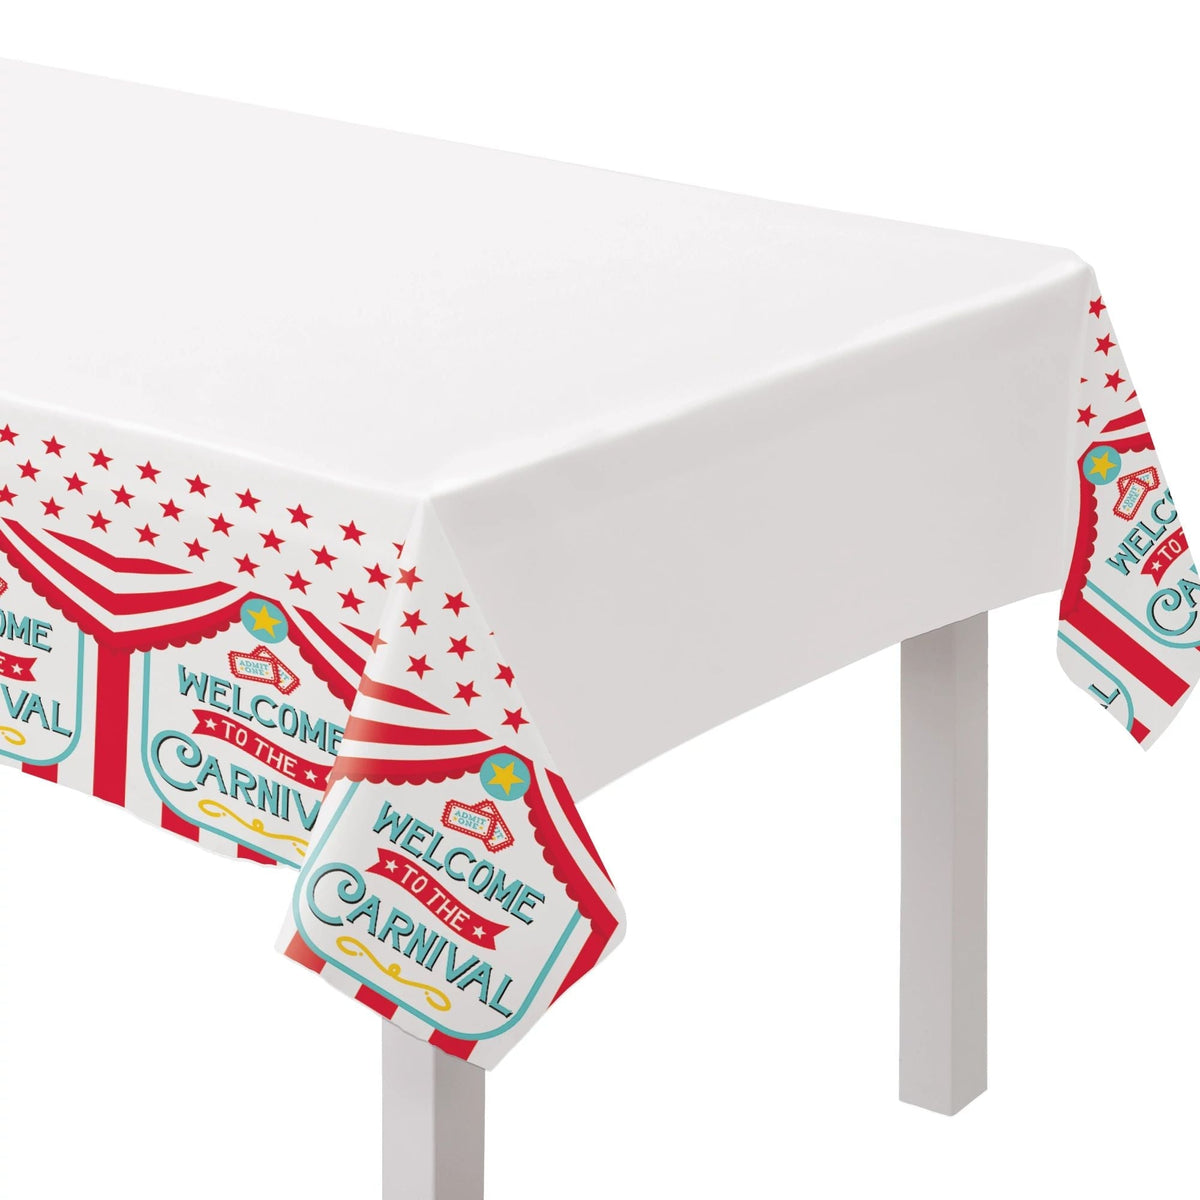 AMSCAN CA Kids Birthday Carnival Birthday Party Printed Plastic Table Cover, 54 in x 102 in 013051784560